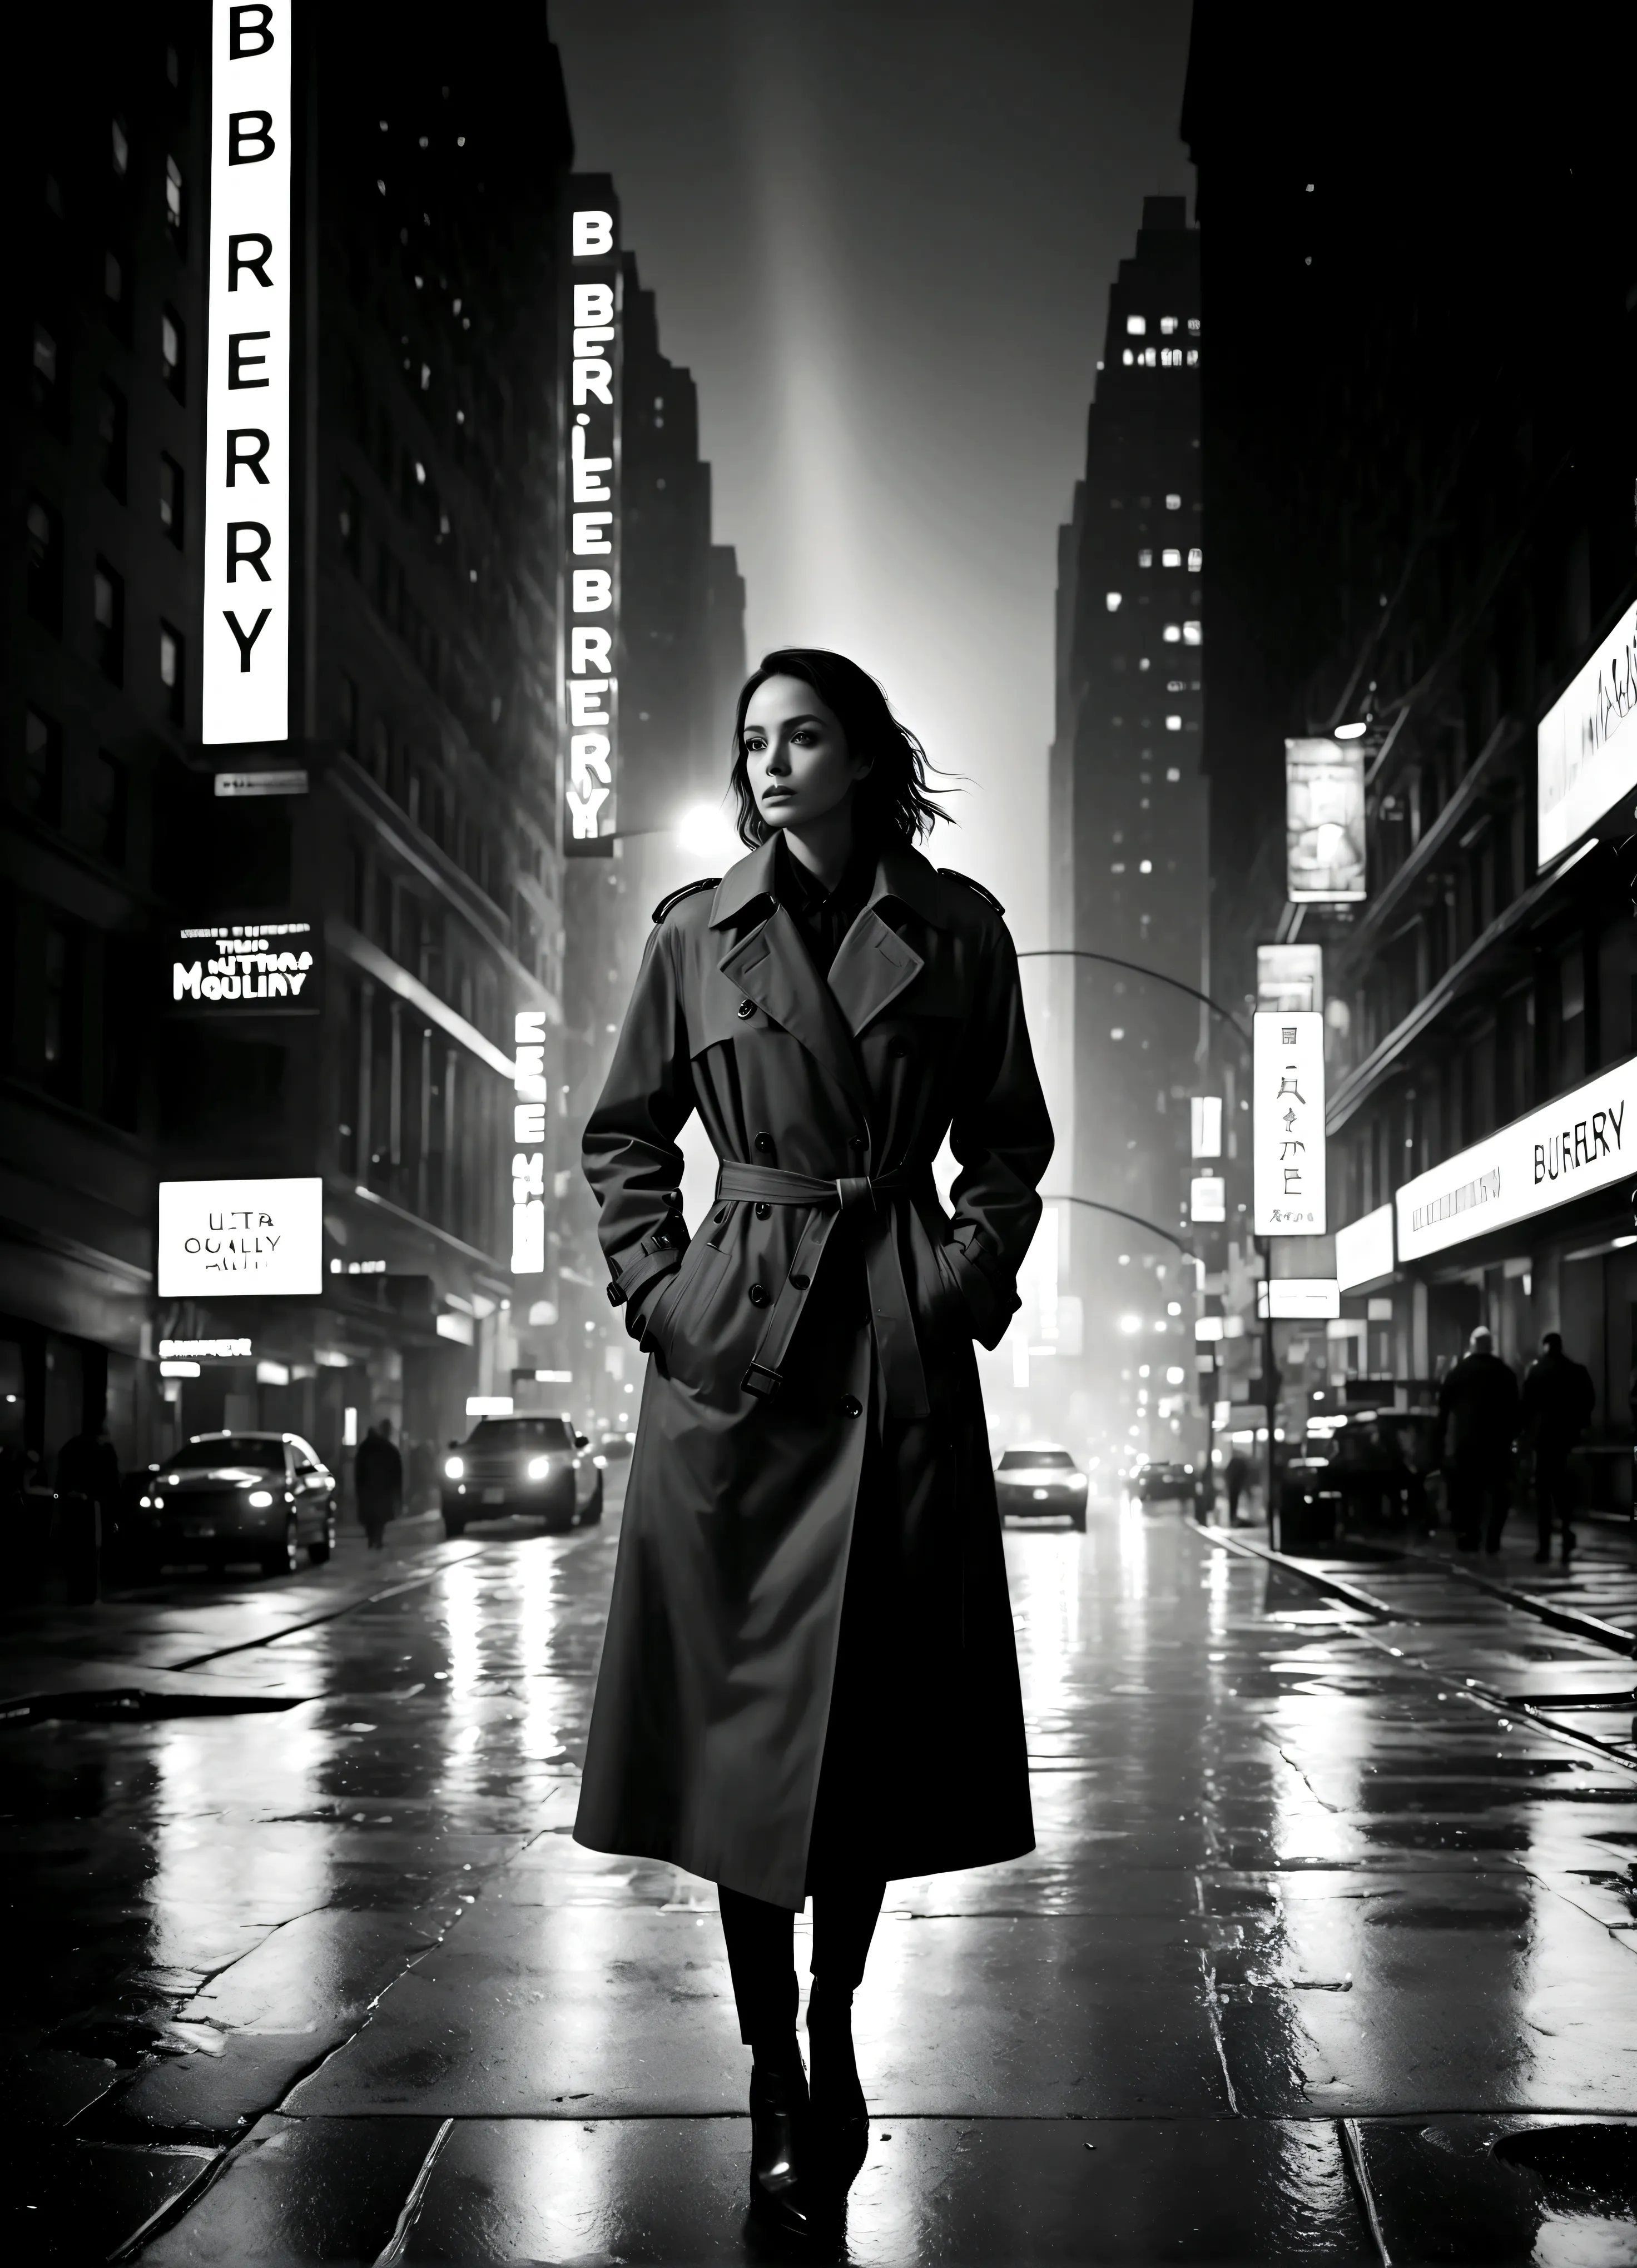 Black and white photography,In a monochrome world. The background is New York City's Manhattan, a nighttime street scene. Light ...